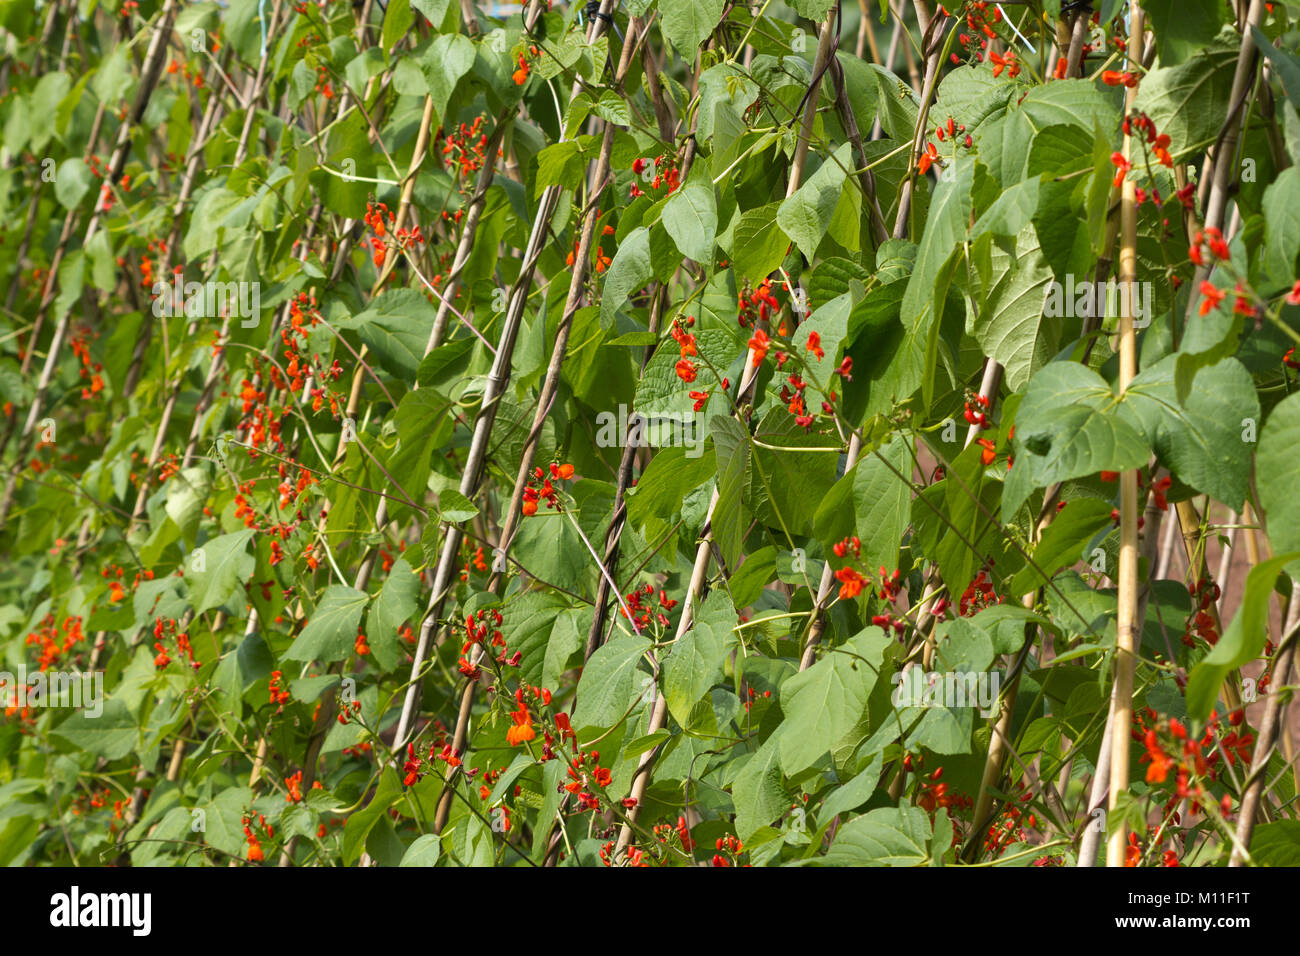 A long row of runner bean plants in flower. Shallow depth of field. Stock Photo